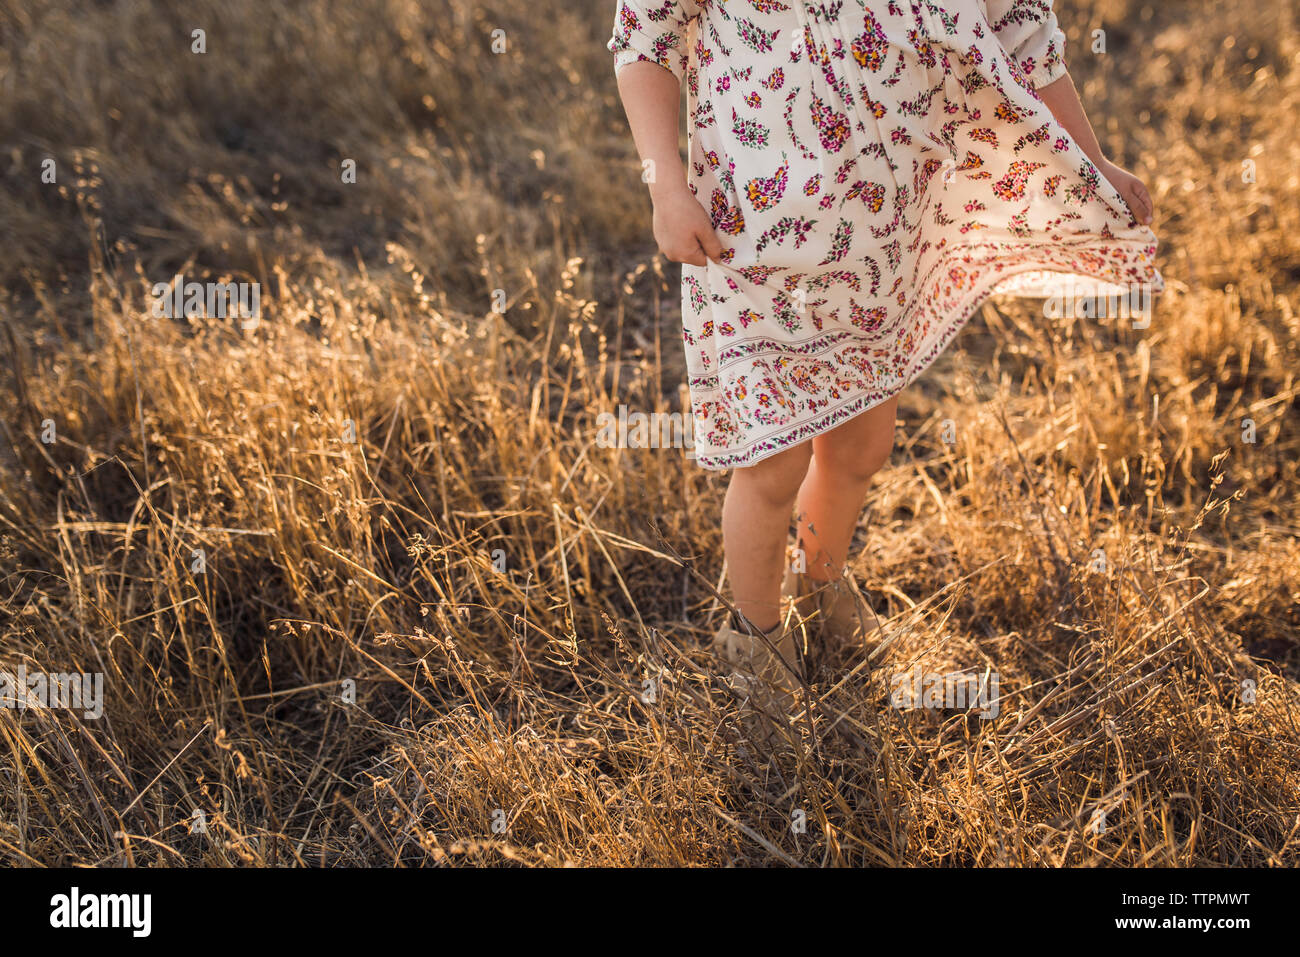 Young girl swinging dress in California field during sunset Stock Photo